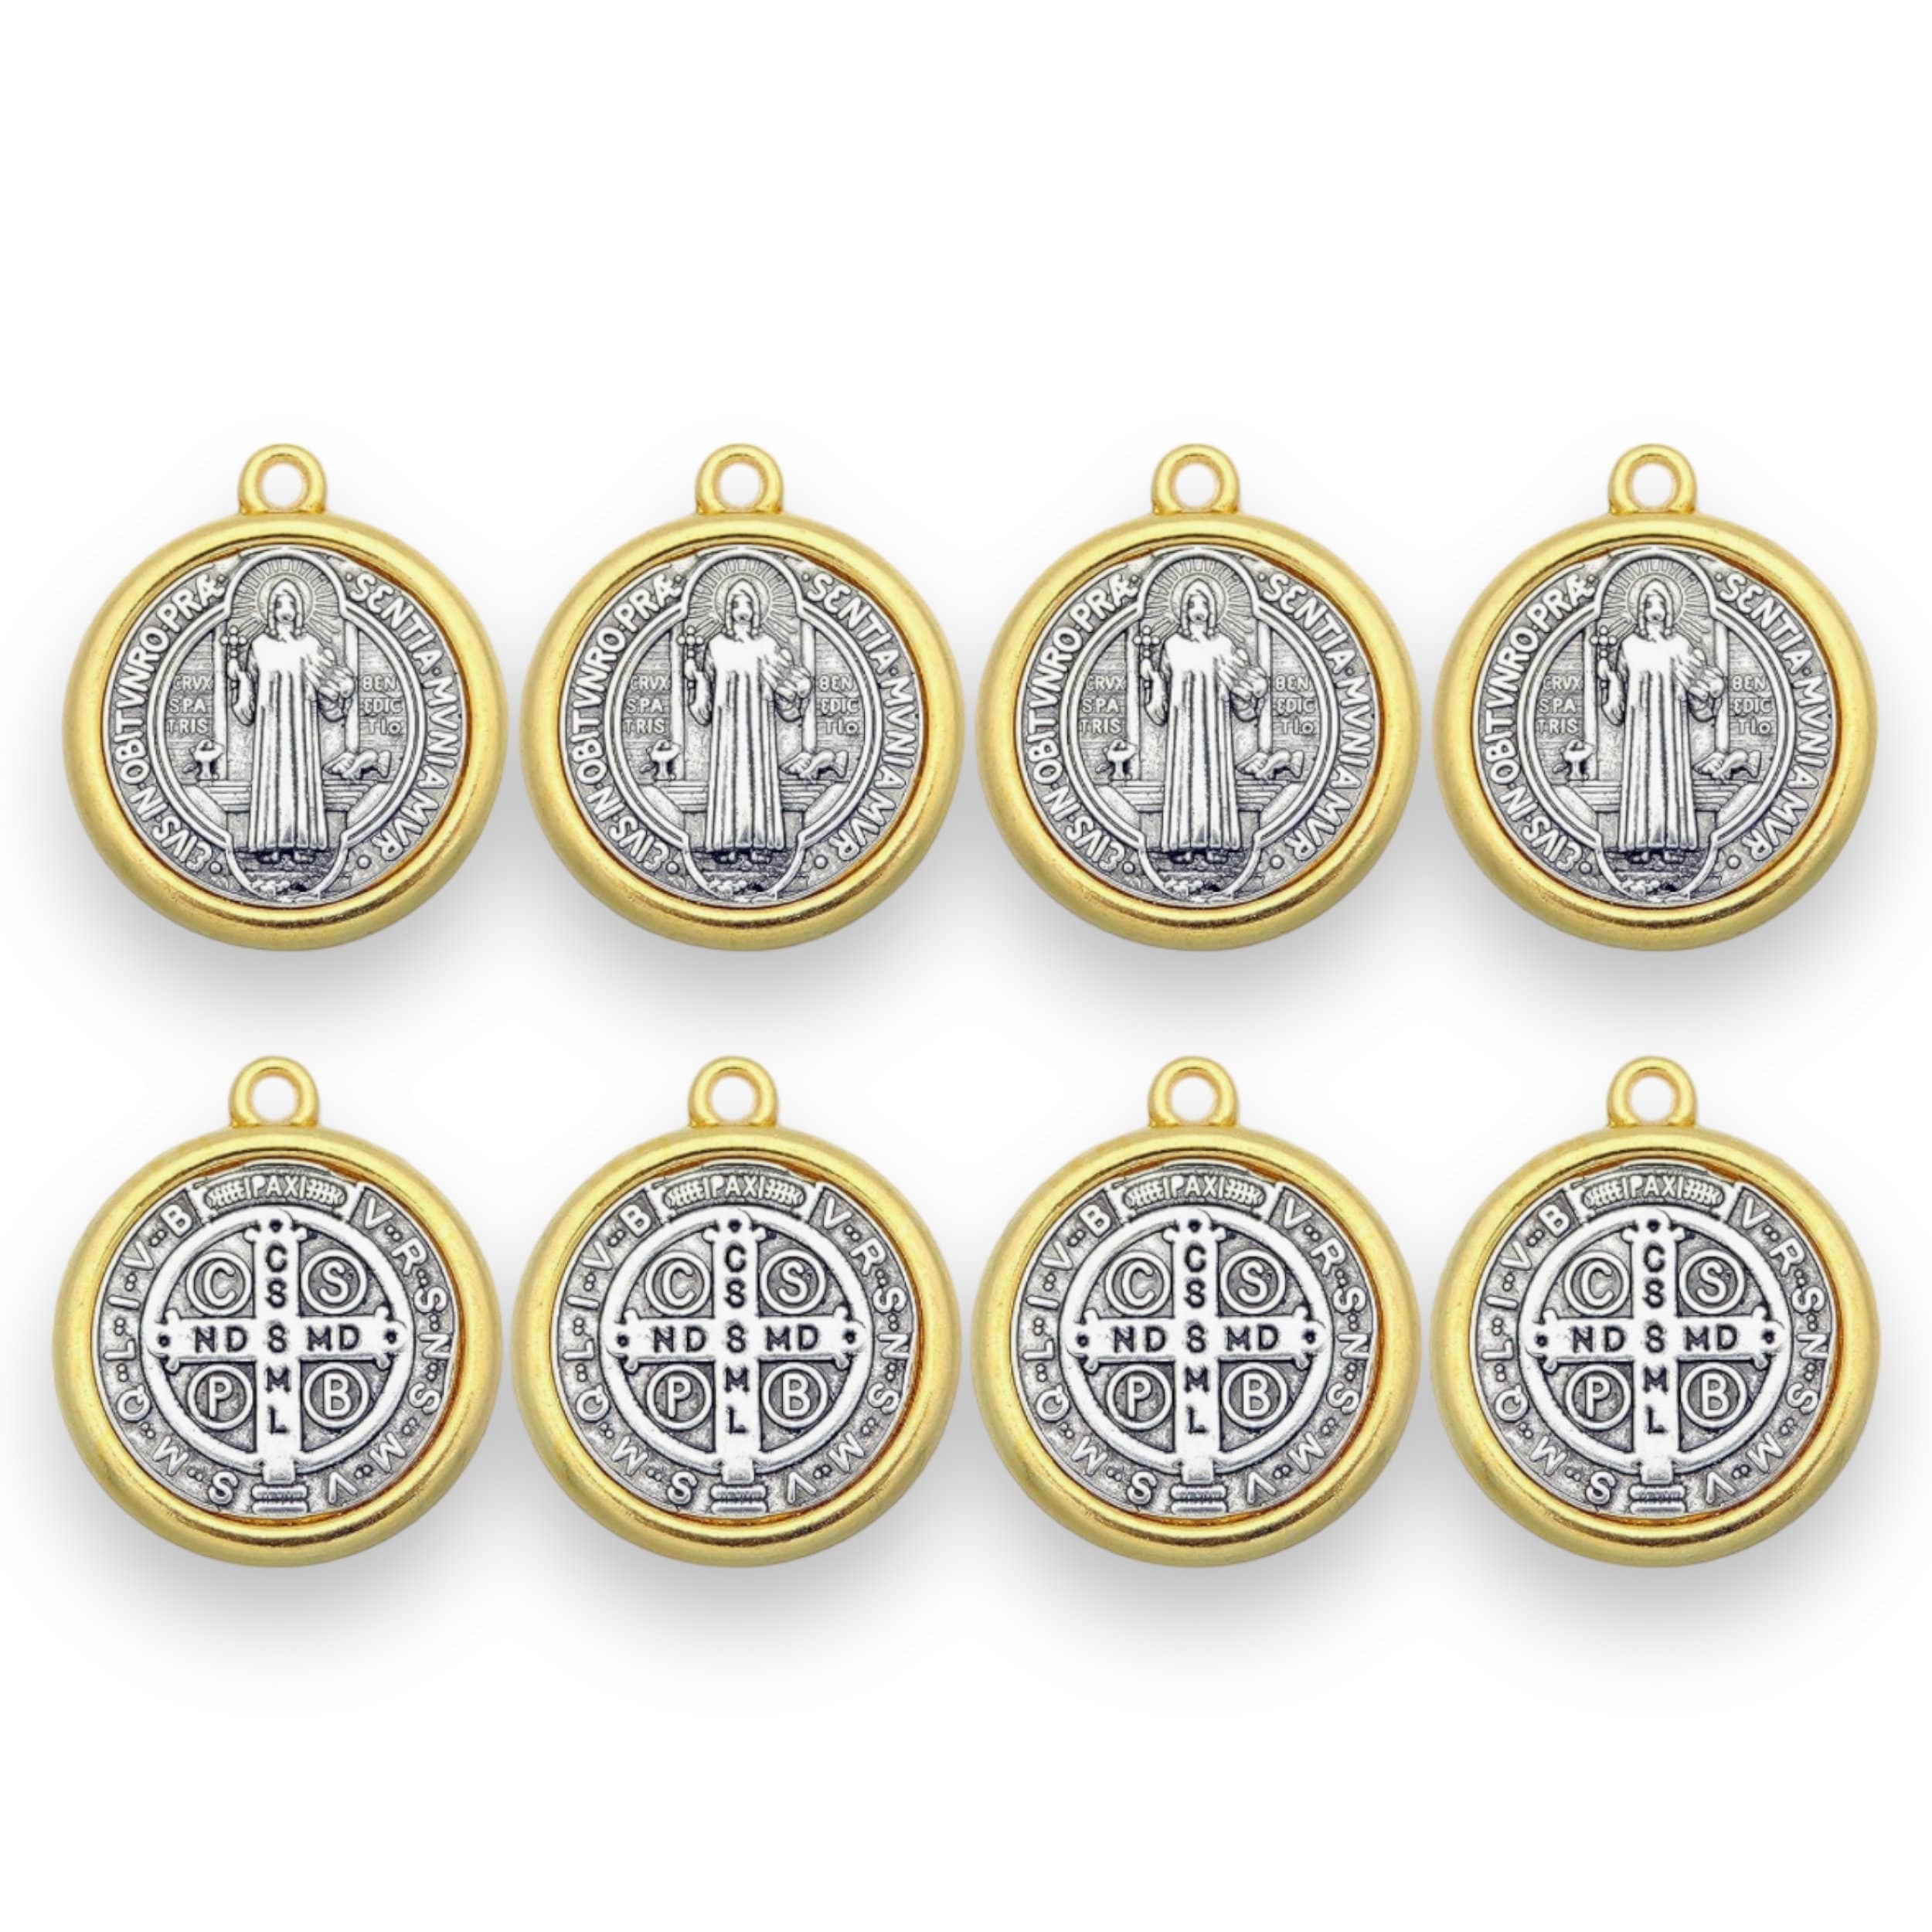 Large Saint Benedict Medal Double Sided Medalla San Benito St Benedict  Catholic Medals Favor Gifts Religious Saint Benedict Charms Resin 